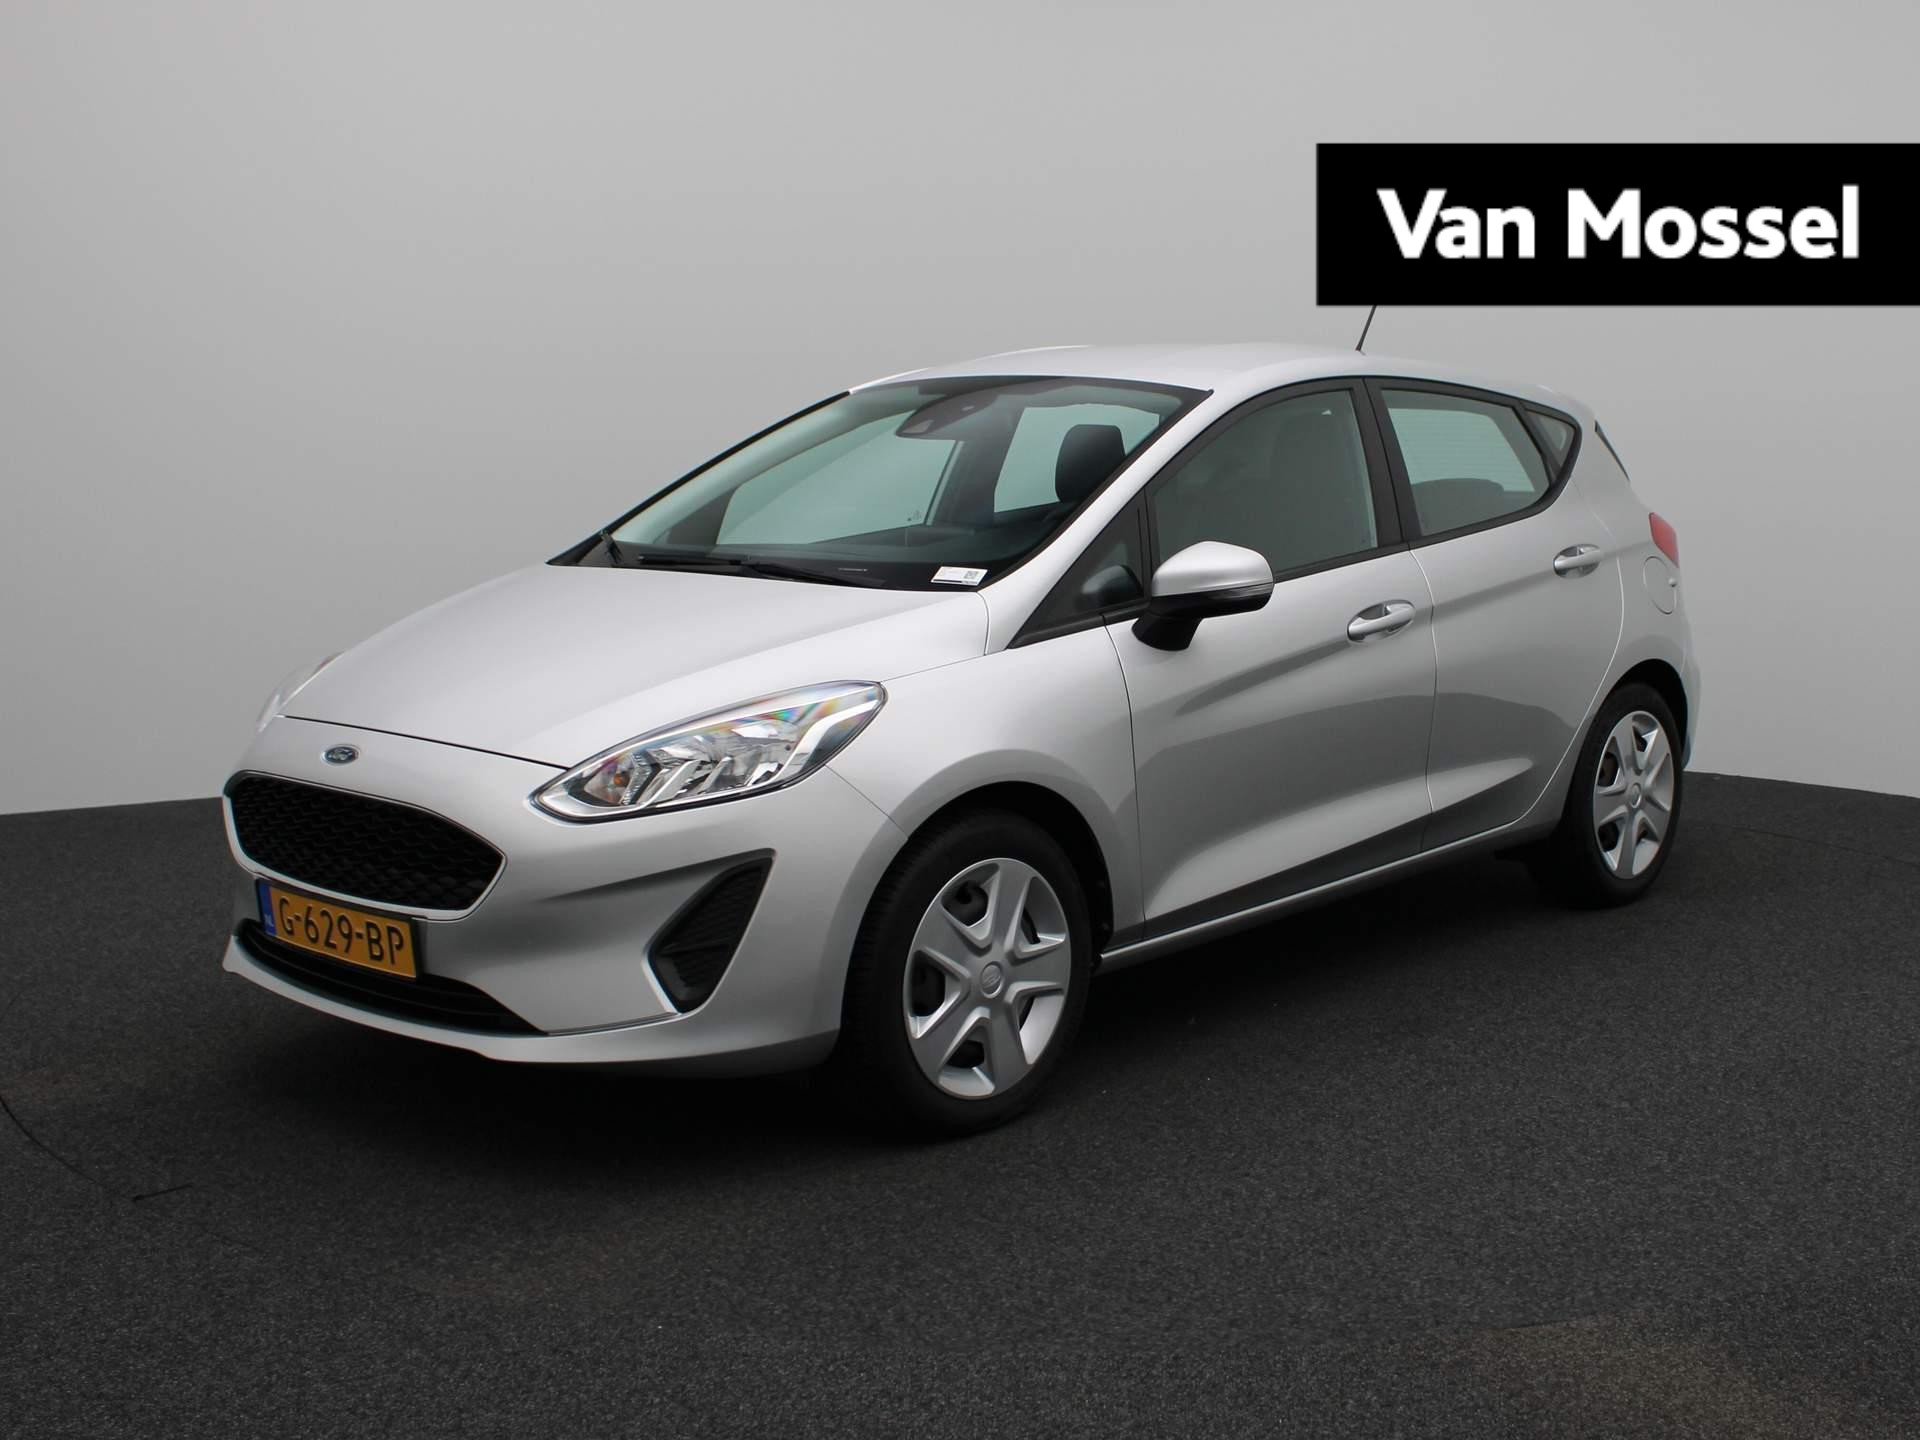 Ford Fiesta 1.1 Trend | Airco | Cruise | PDC | Bluetooth | LED | Rijstrooksensor met Correctie | Driver Assistance Pack 1 |